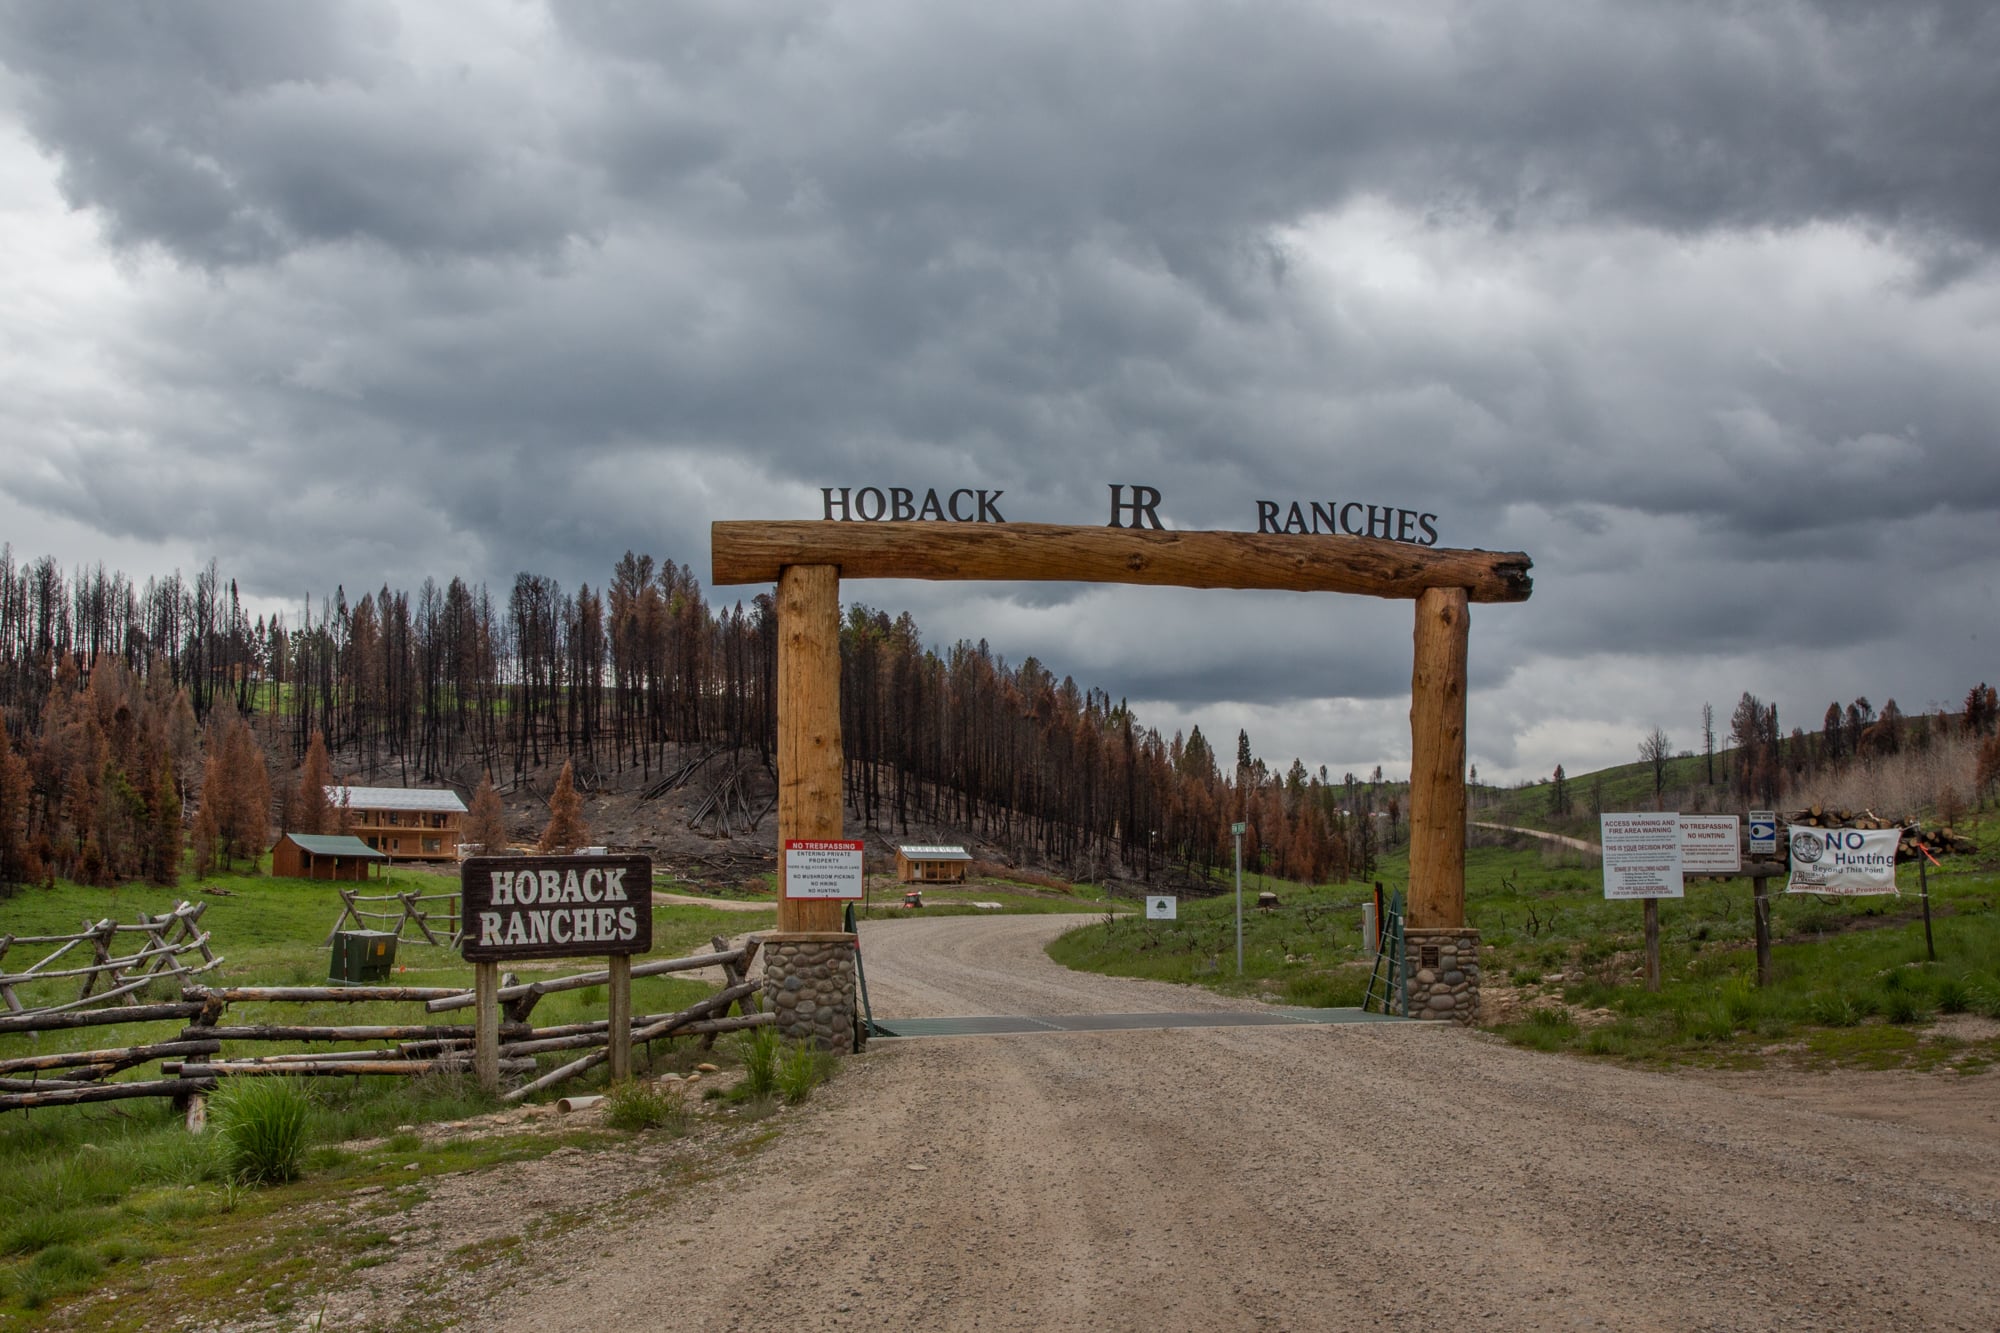 About 300 residents live in Hoback Ranches, a 6,500-acre subdivision with about 125 homes south of Bondurant, Wyoming. The Roosevelt Fire last September destroyed 55 of them. (Bailey Lewis/News21)